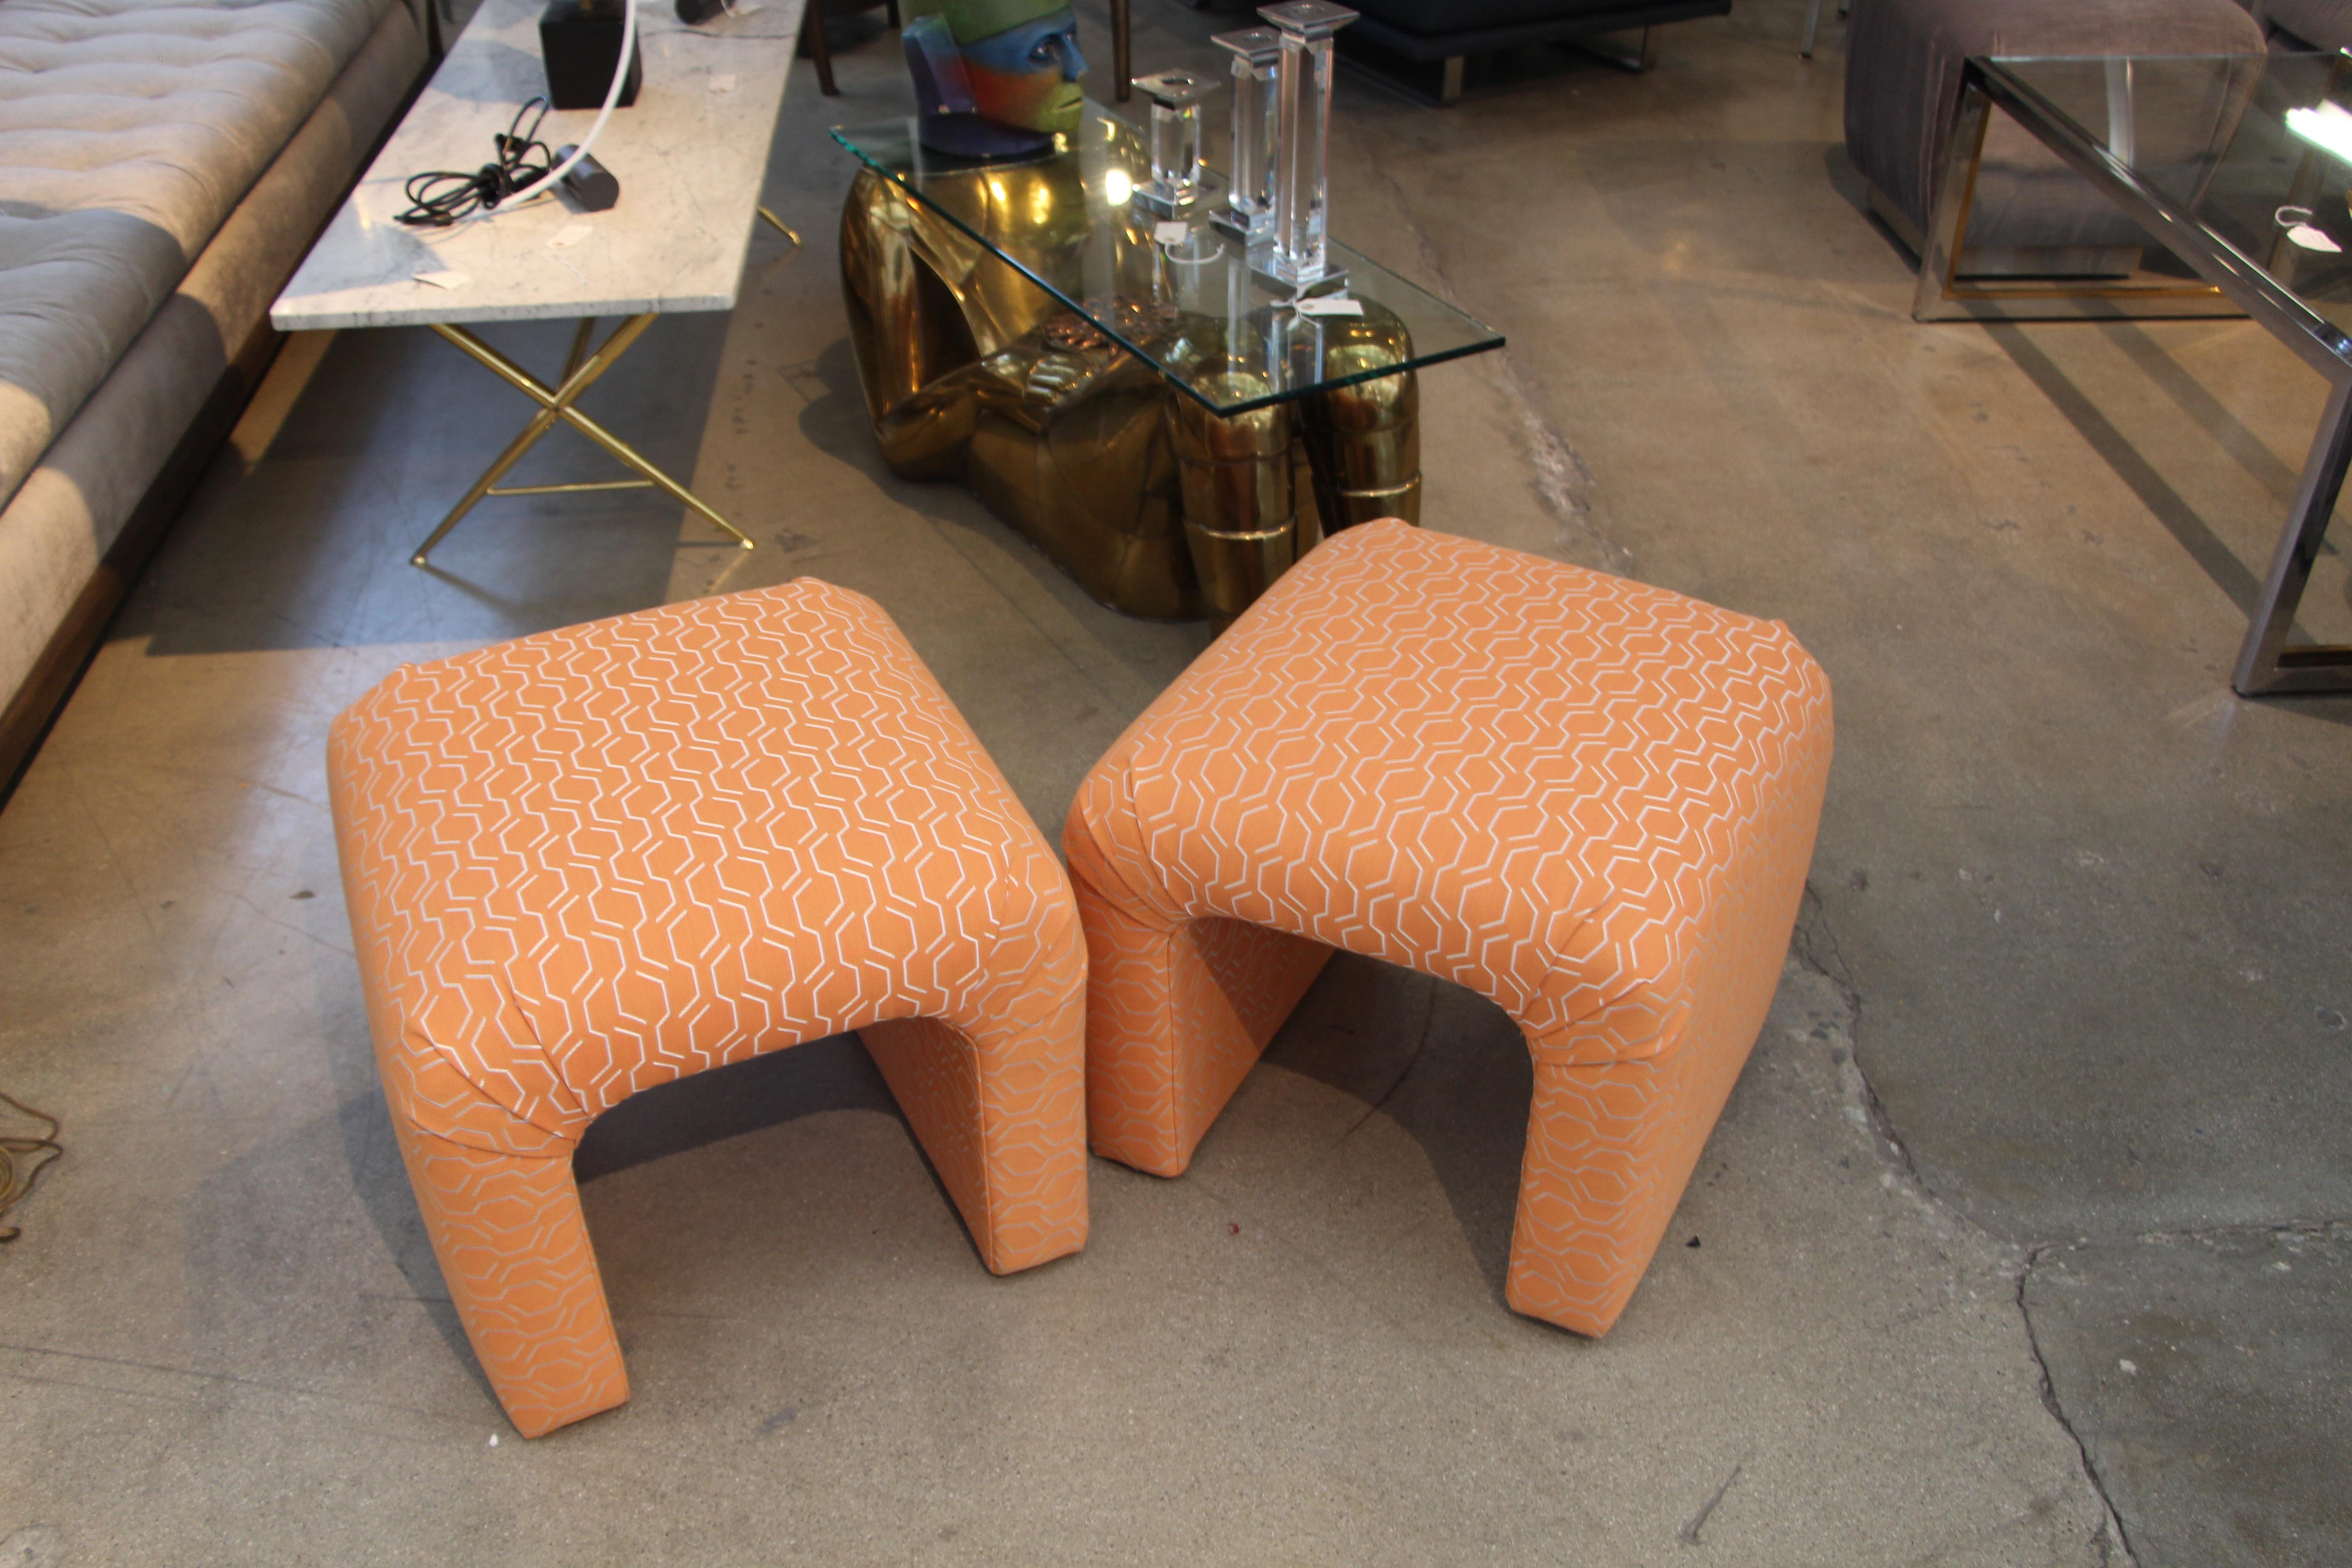 A nice pair of vintage ottomans that have been redone in a nice orange fabric.